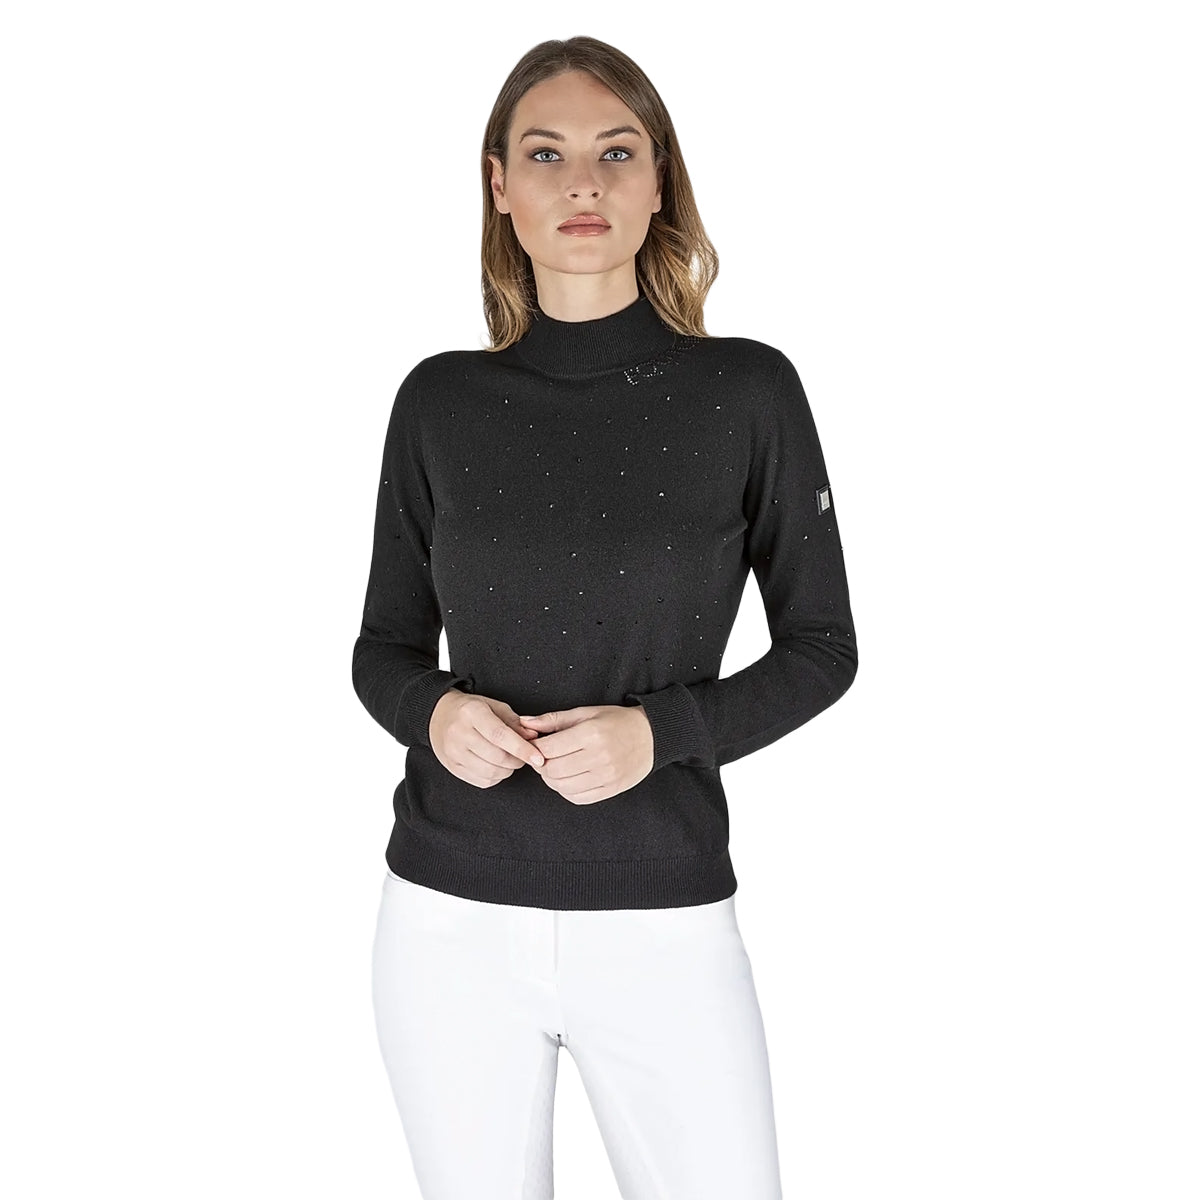 Equiline Women's Grueleg Blinged Out Knit Sweater